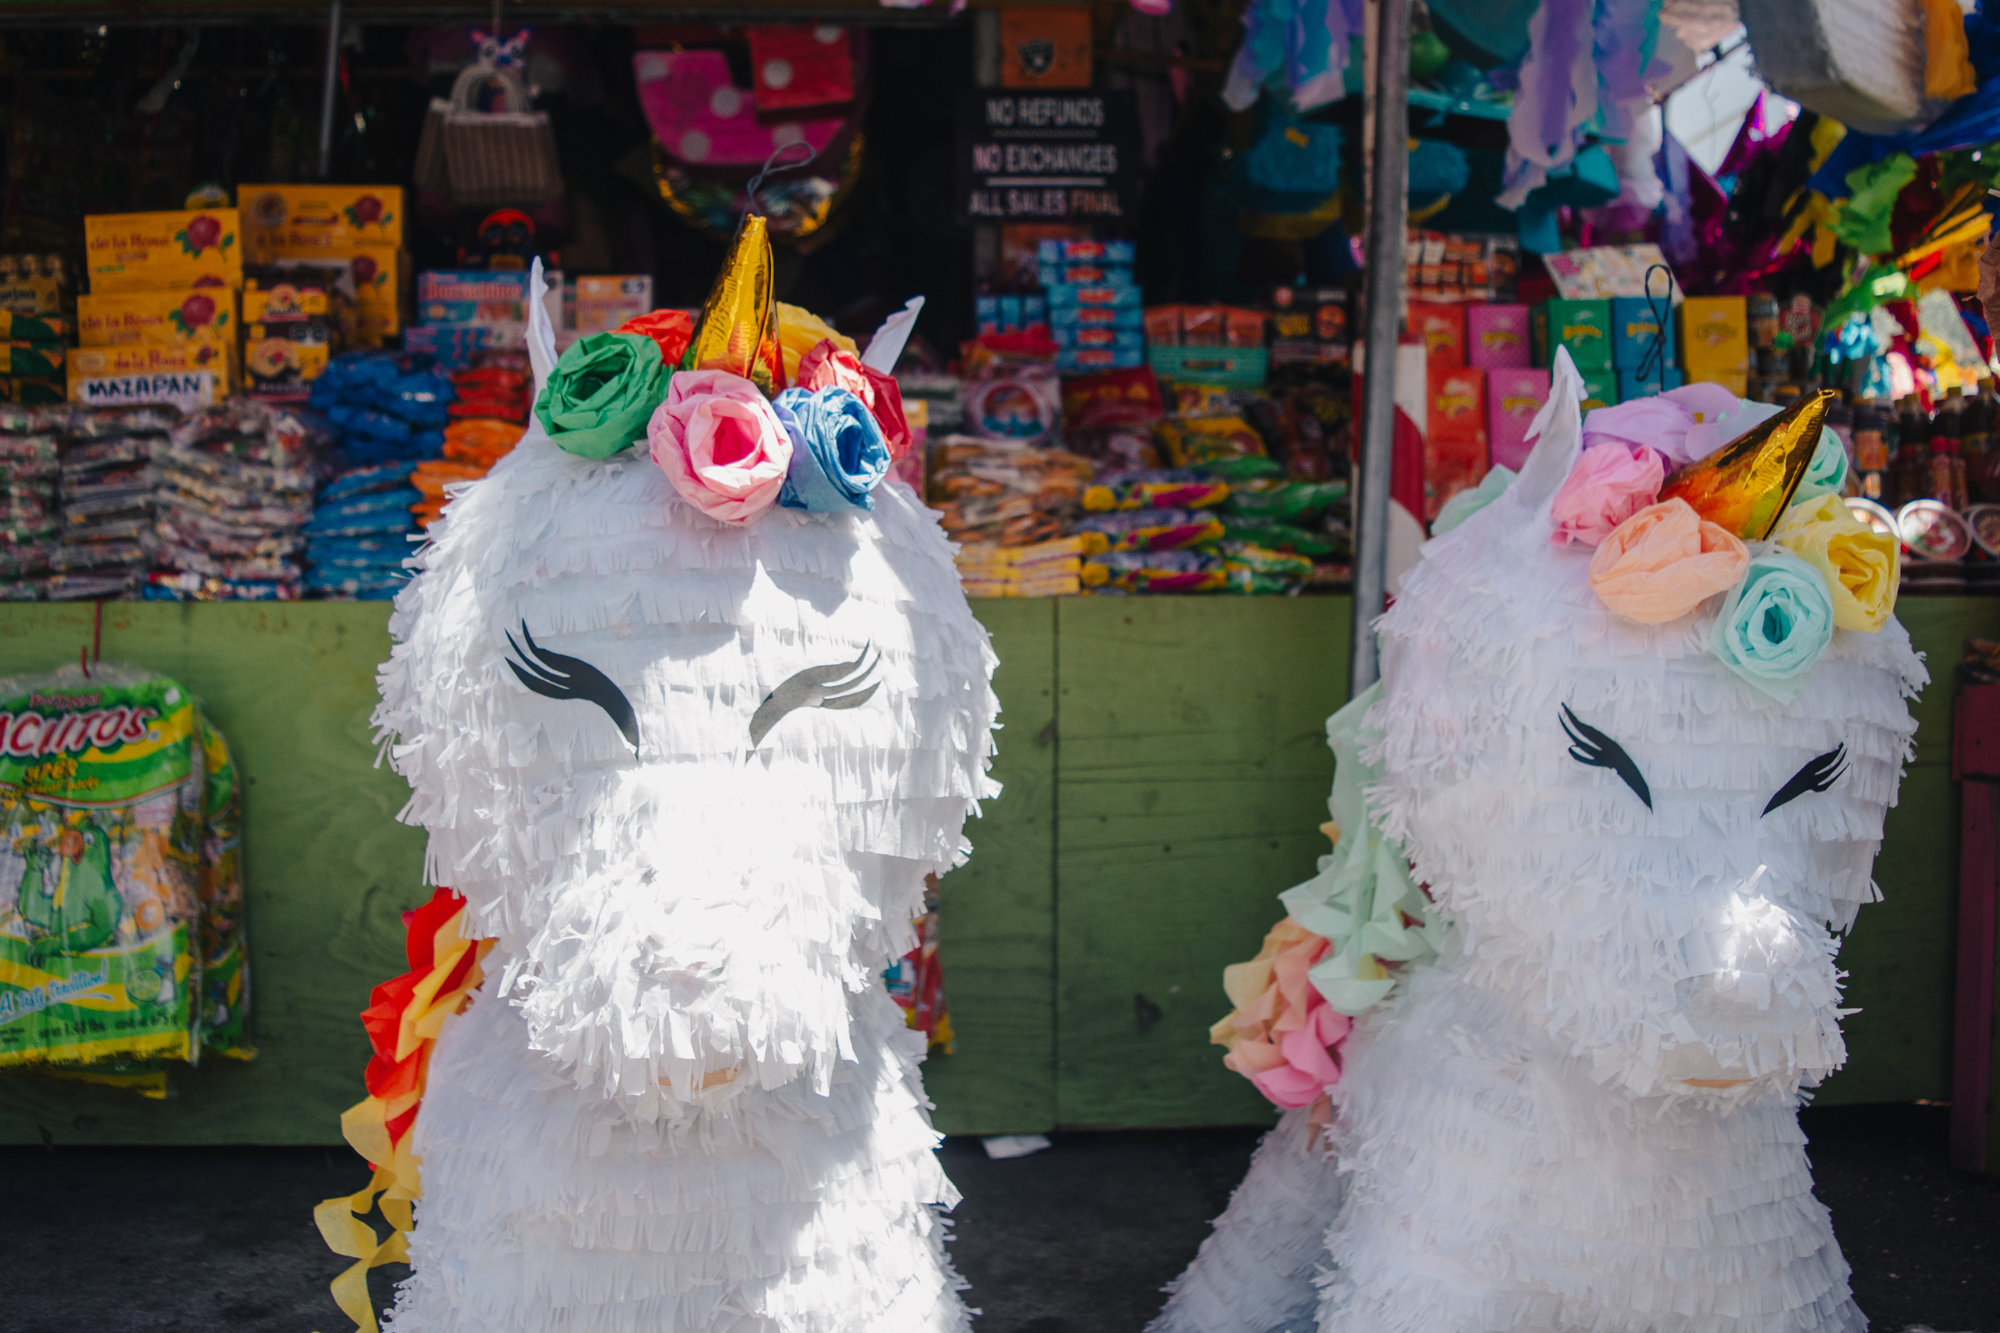 Two large white piñata unicorns in front of a stall full of wares.